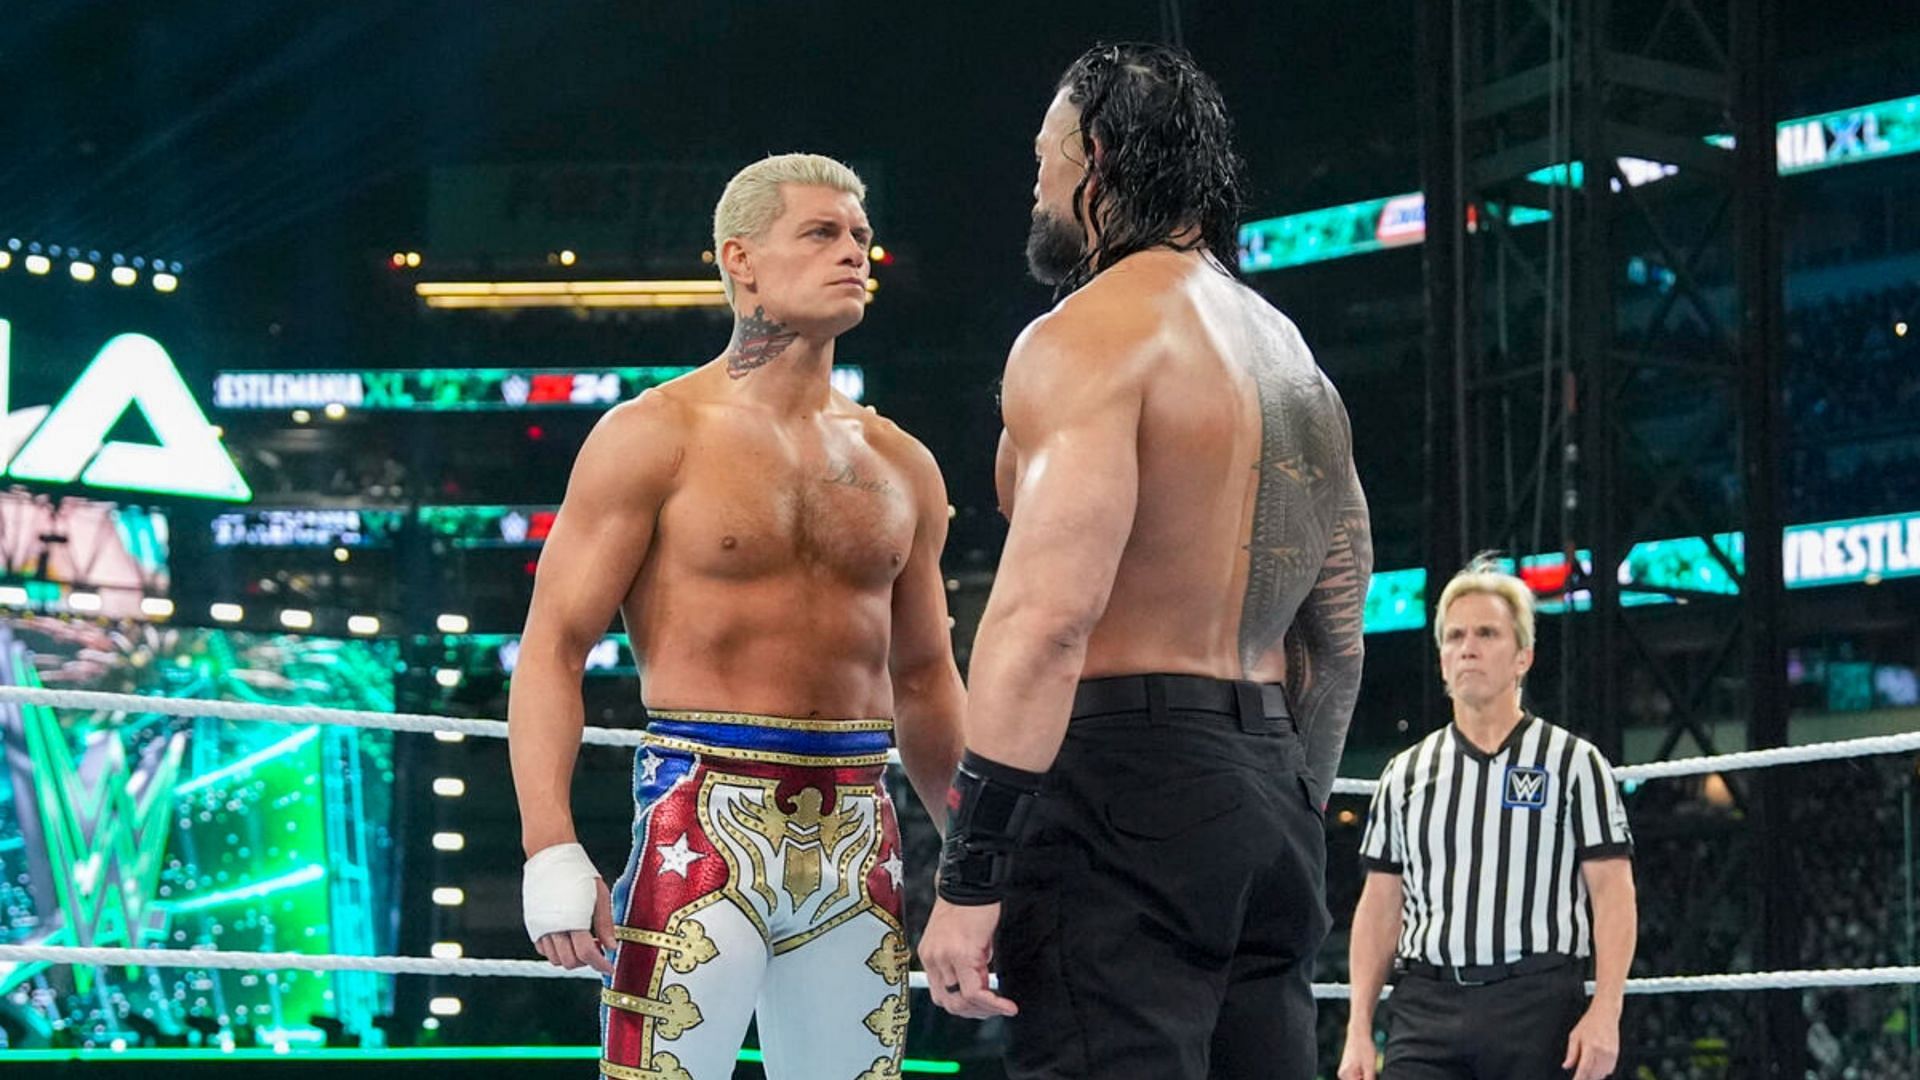 Cody Rhodes defeated Roman Reigns at WWE WrestleMania XL